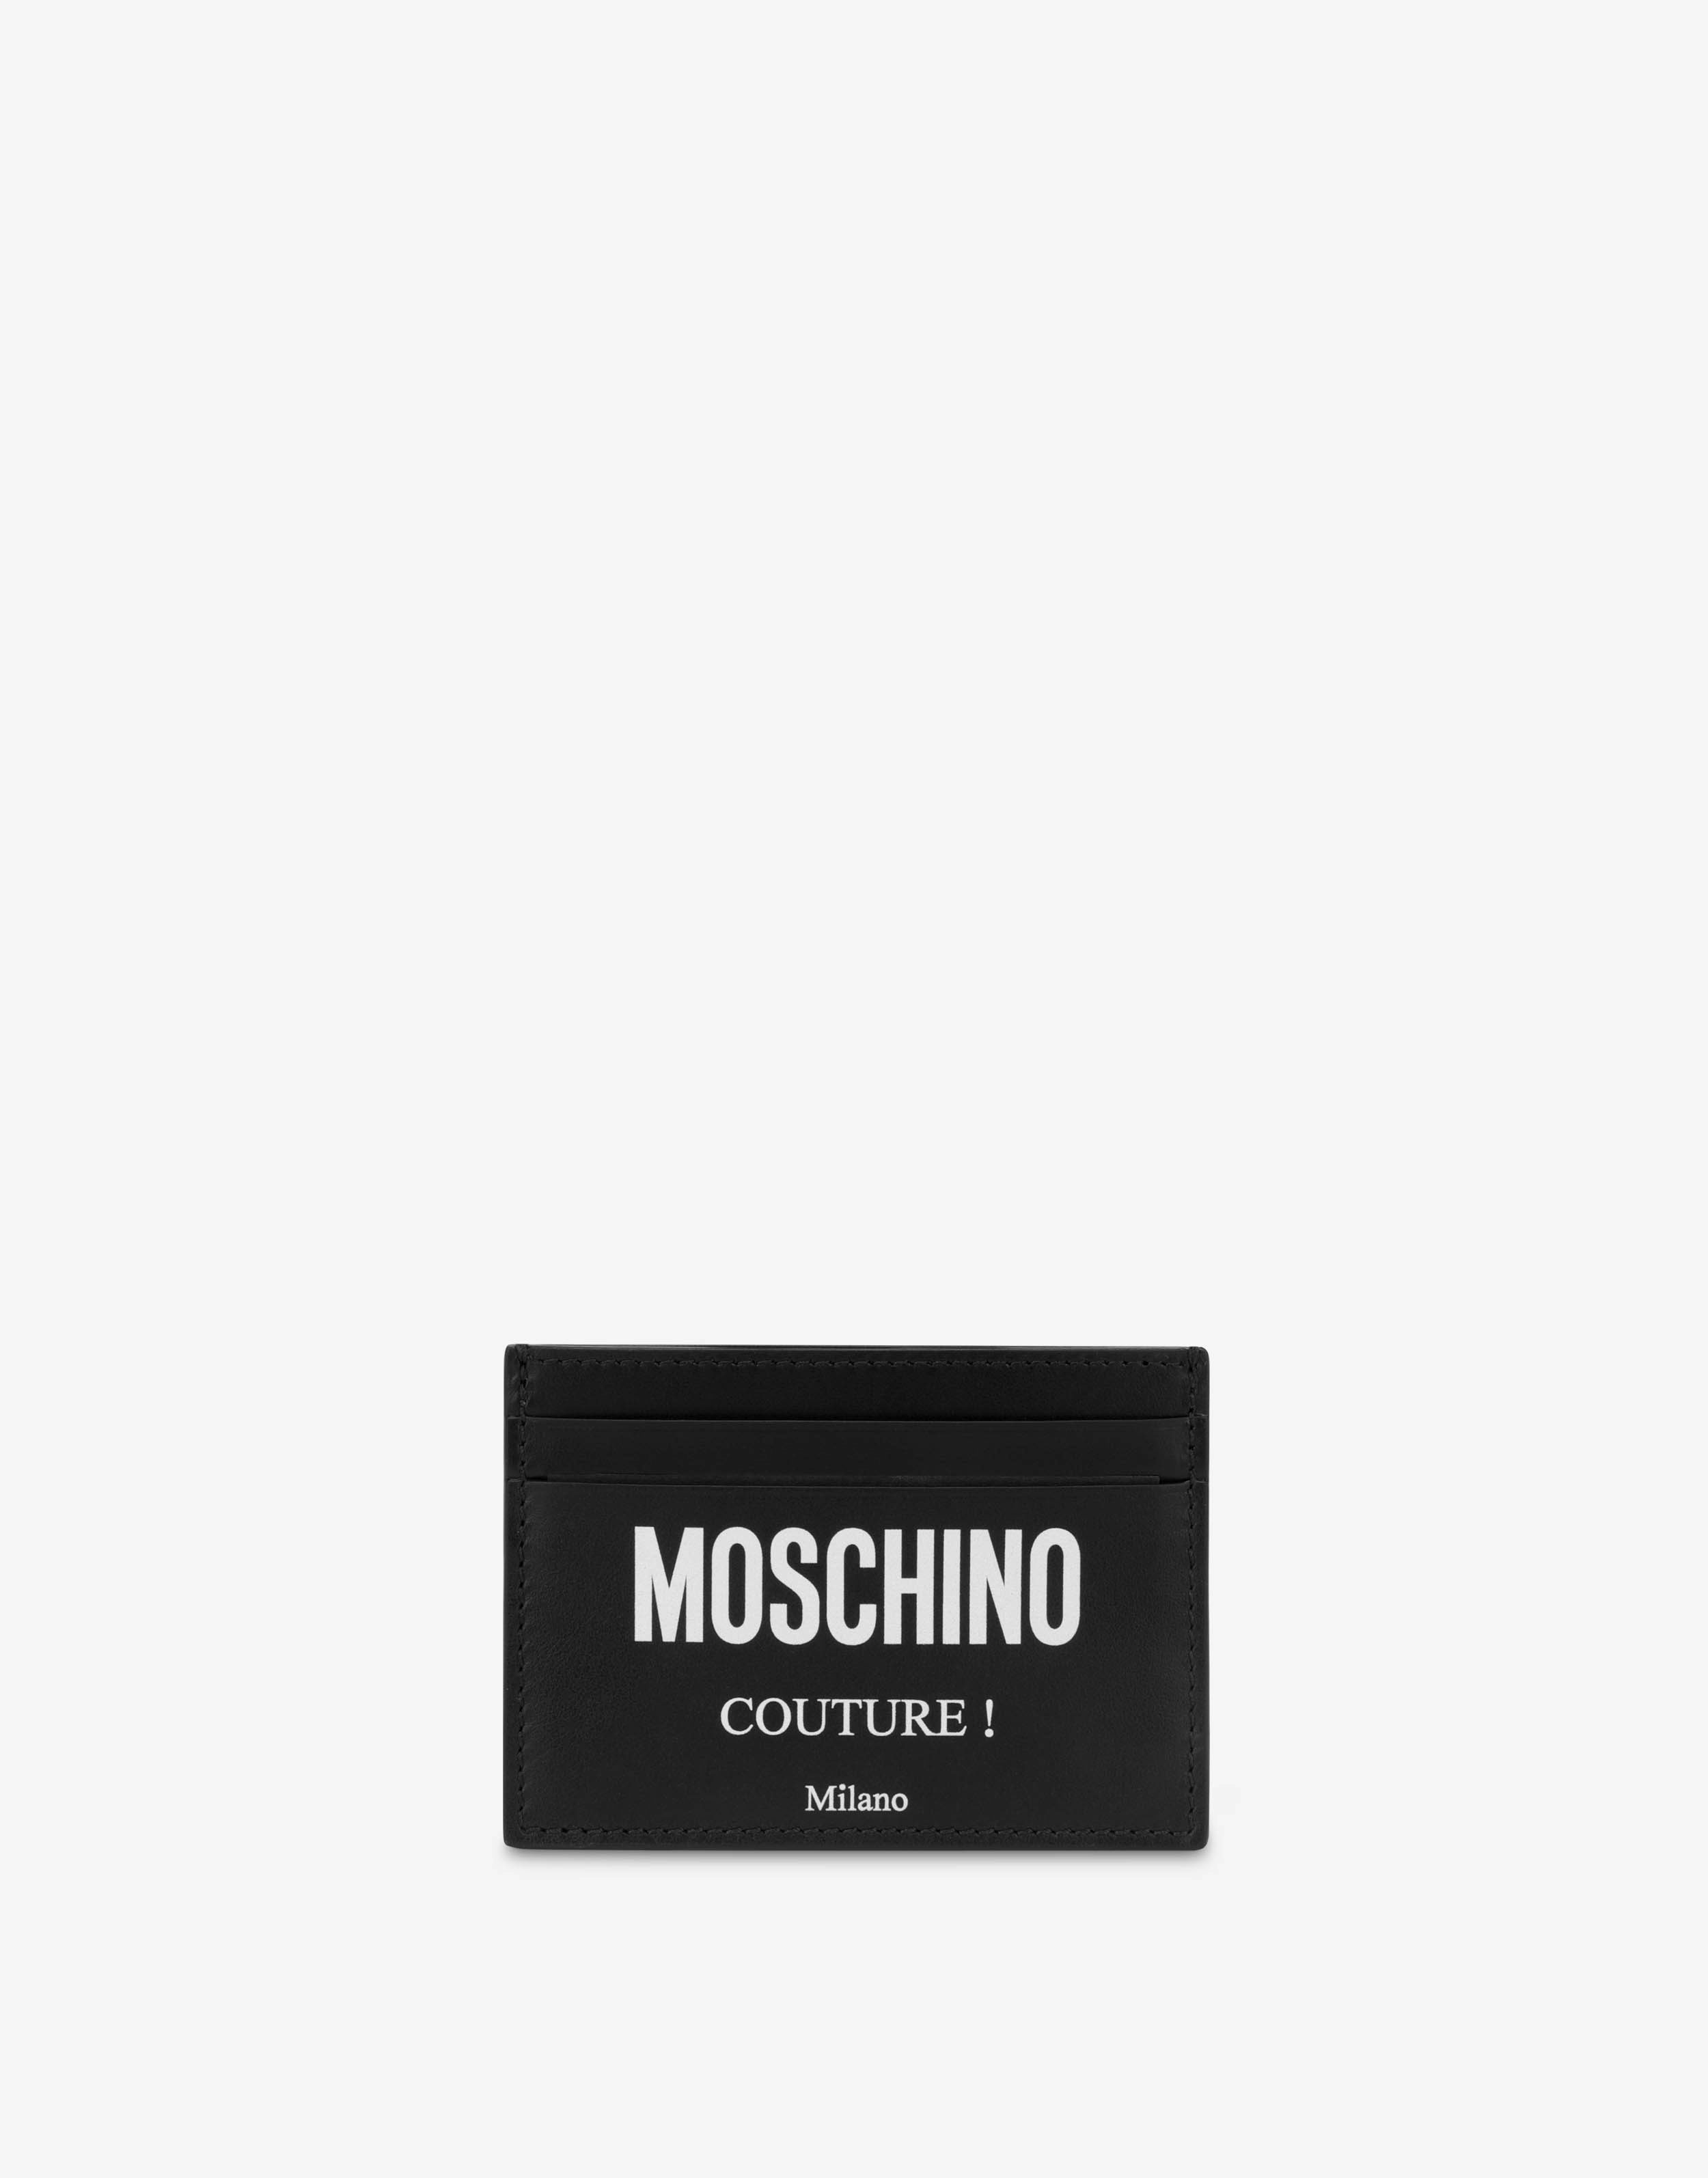 Moschino 財布・小物 for メンズ - Official Store